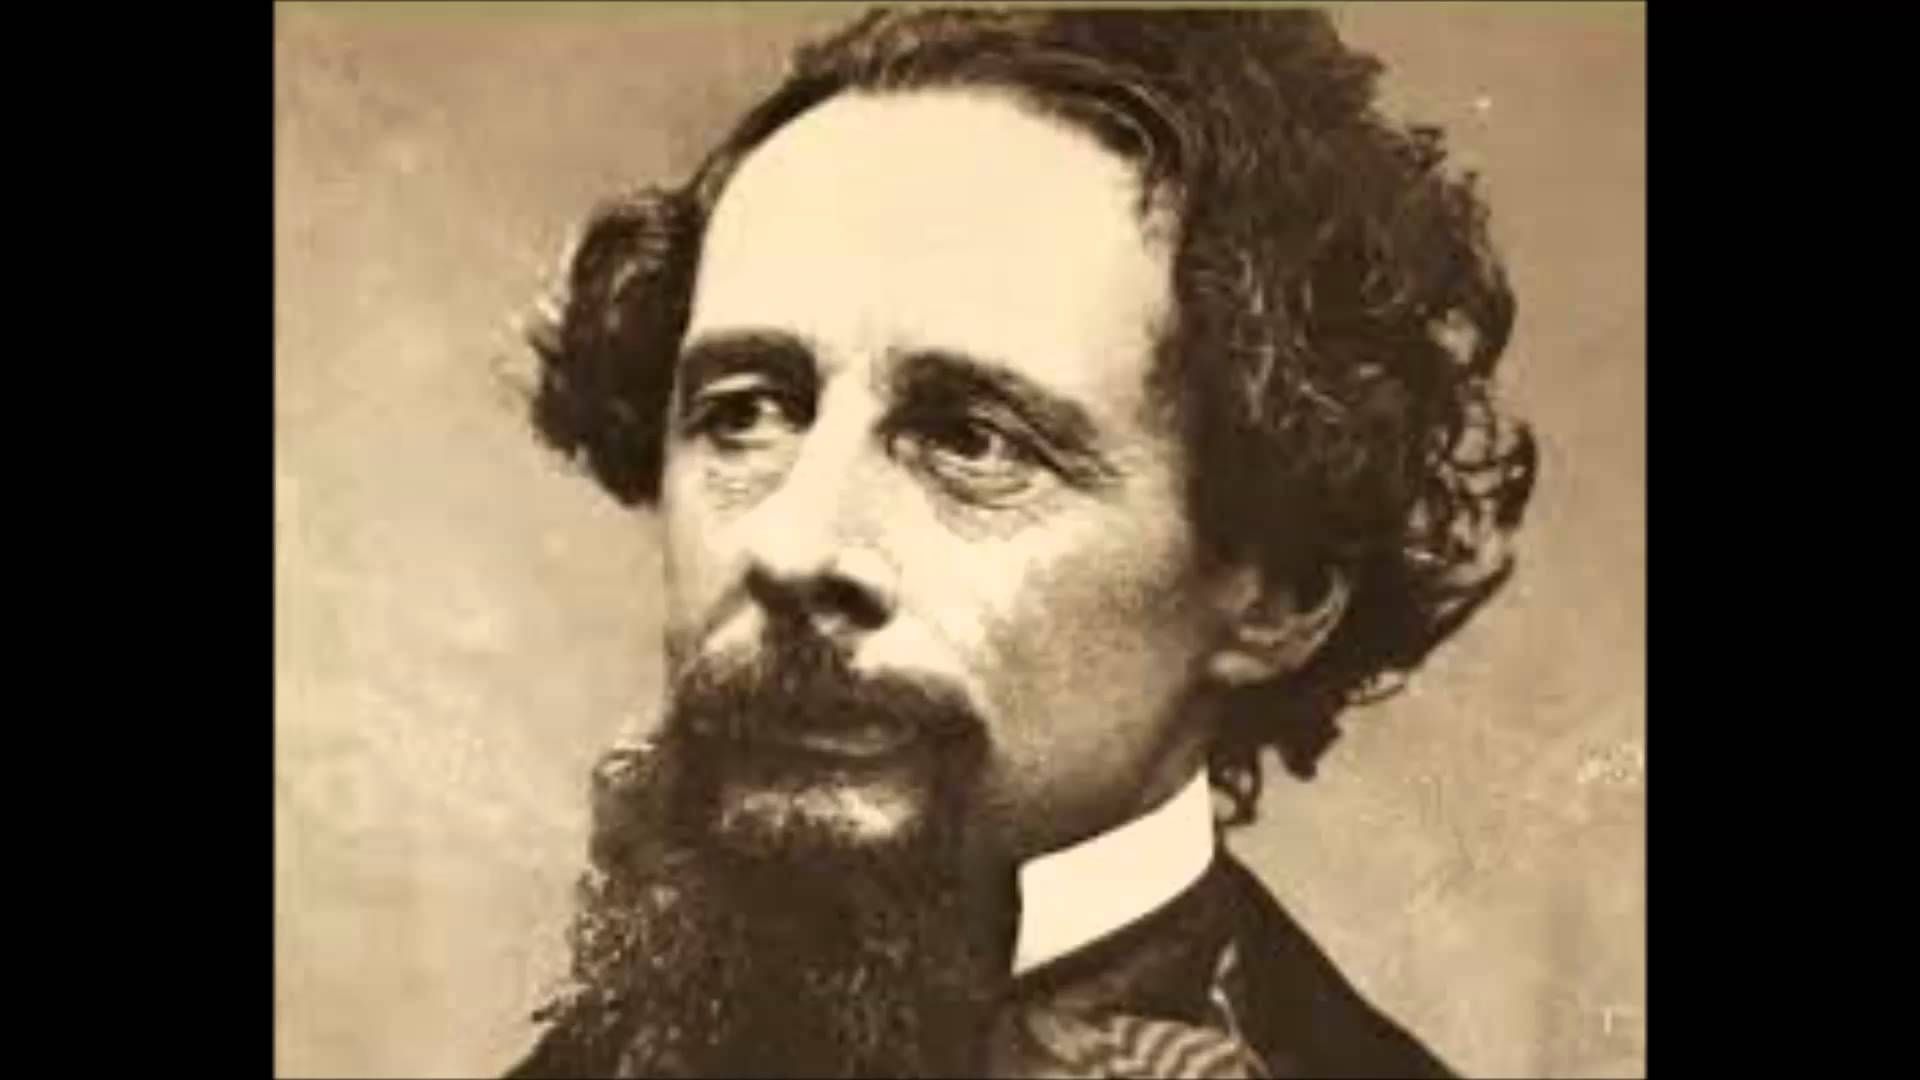 Biography of famous people in Tamil - Charles Dickens (Author)